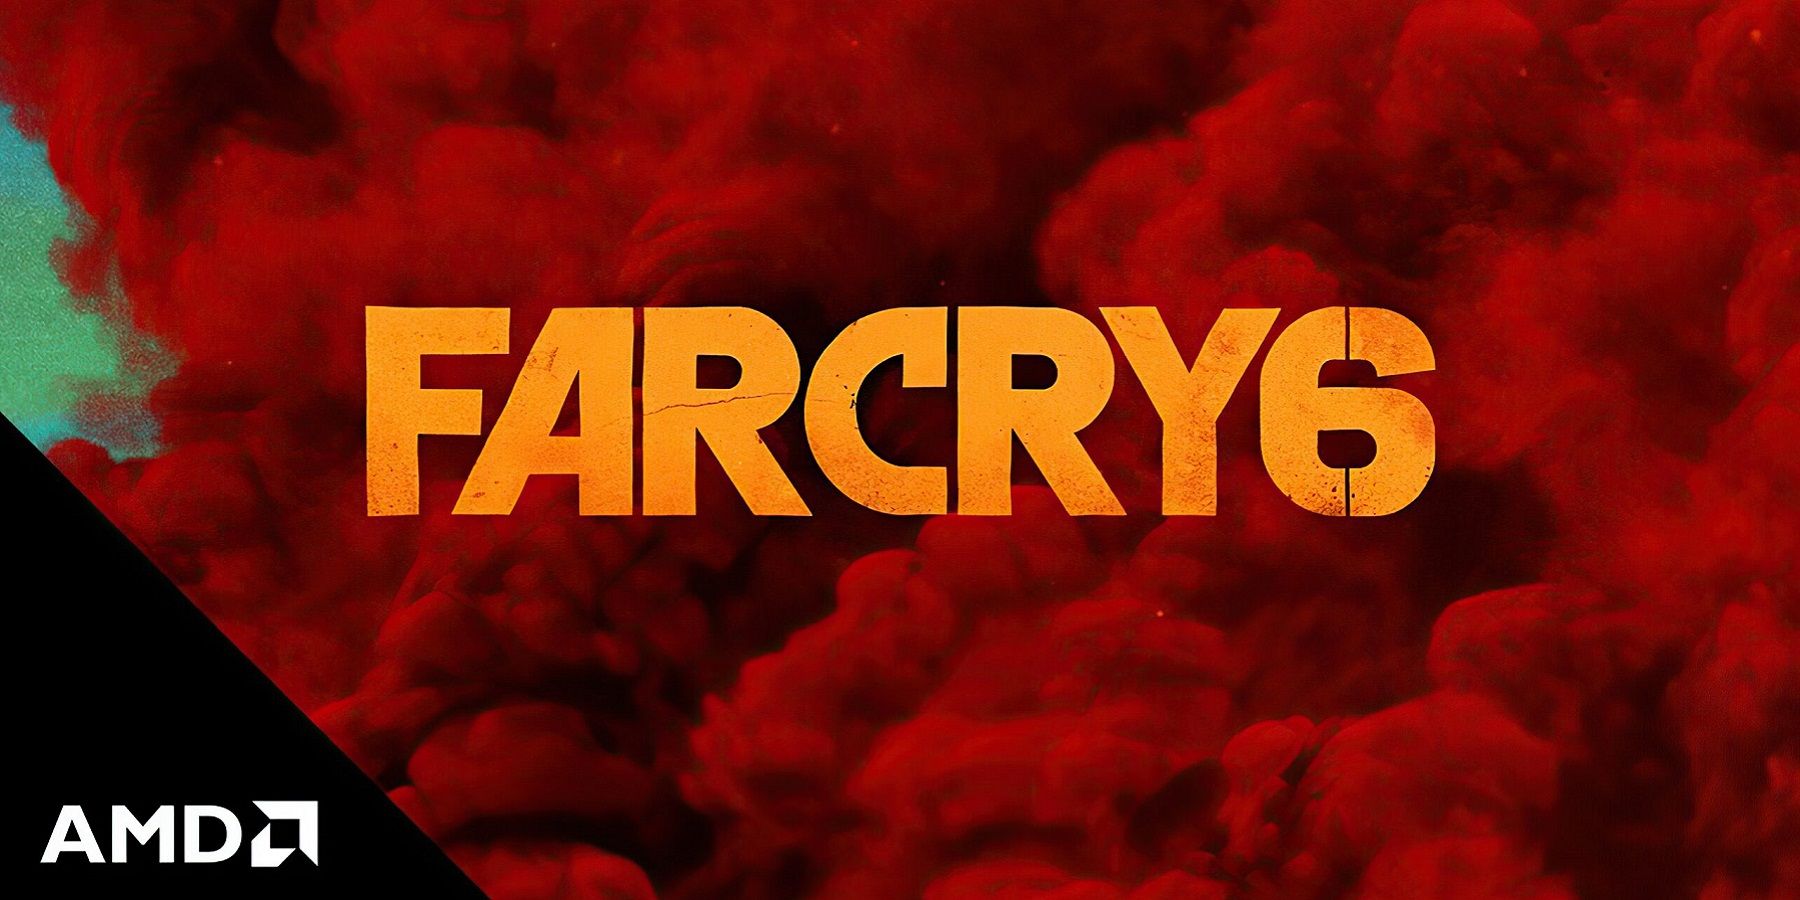 Image showing the Far Cry 6 logo with red smoke behind it, and the AMD logo in the bottom left corner.